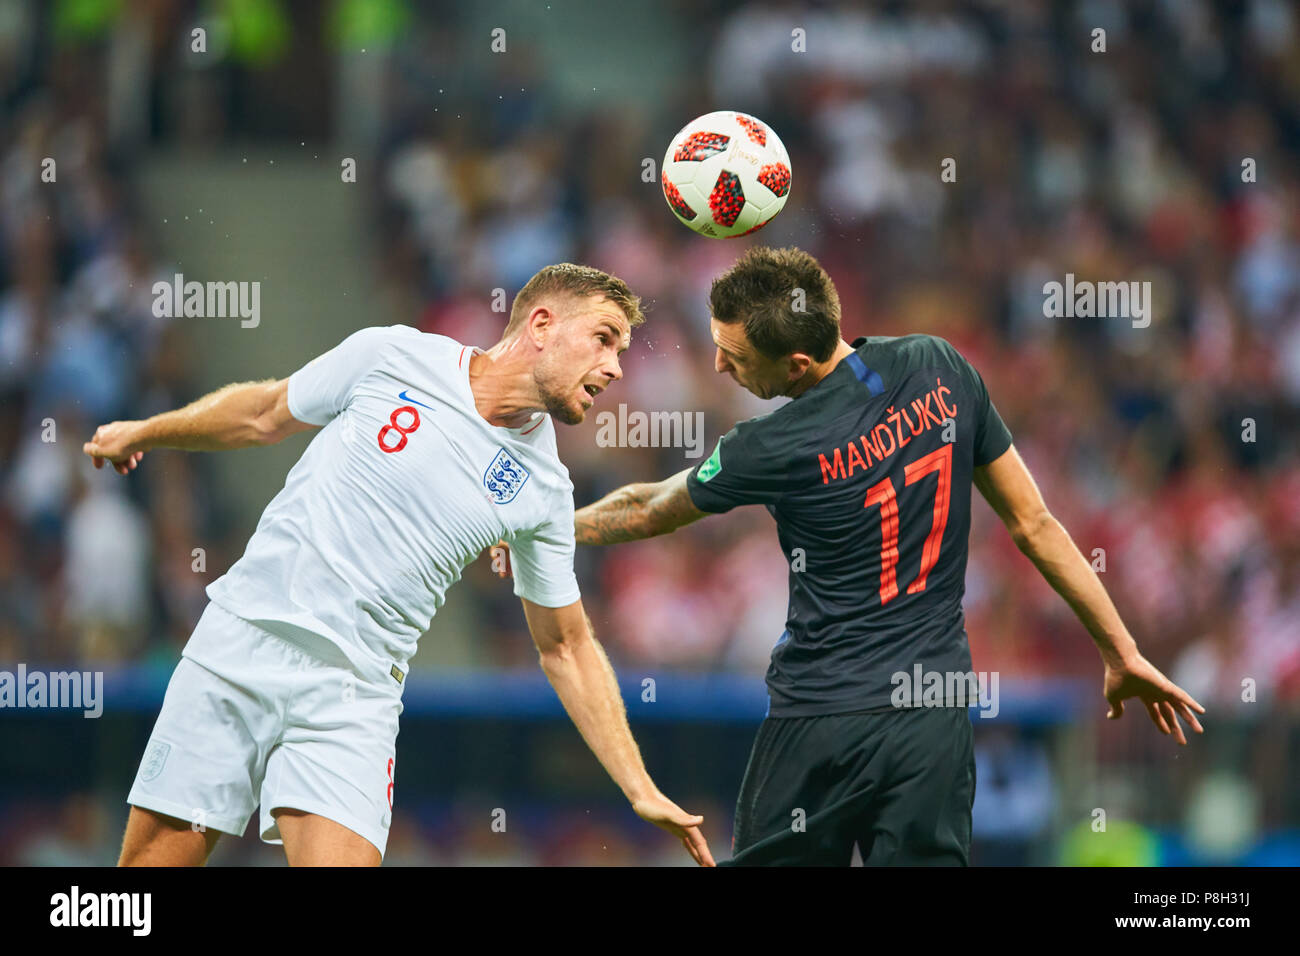 Moscow, Russia. 11th July 2018. England - Croatia, Soccer, Moscow, July 11, 2018 Mario MANDZUKIC, Croatia Nr.17  compete for the ball, tackling, duel, header against Jordan HENDERSON, England 8  ENGLAND  - CROATIA  FIFA WORLD CUP 2018 RUSSIA, Semifinal, Season 2018/2019,  July 11, 2018 in Moscow, Russia. © Peter Schatz / Alamy Live News Stock Photo